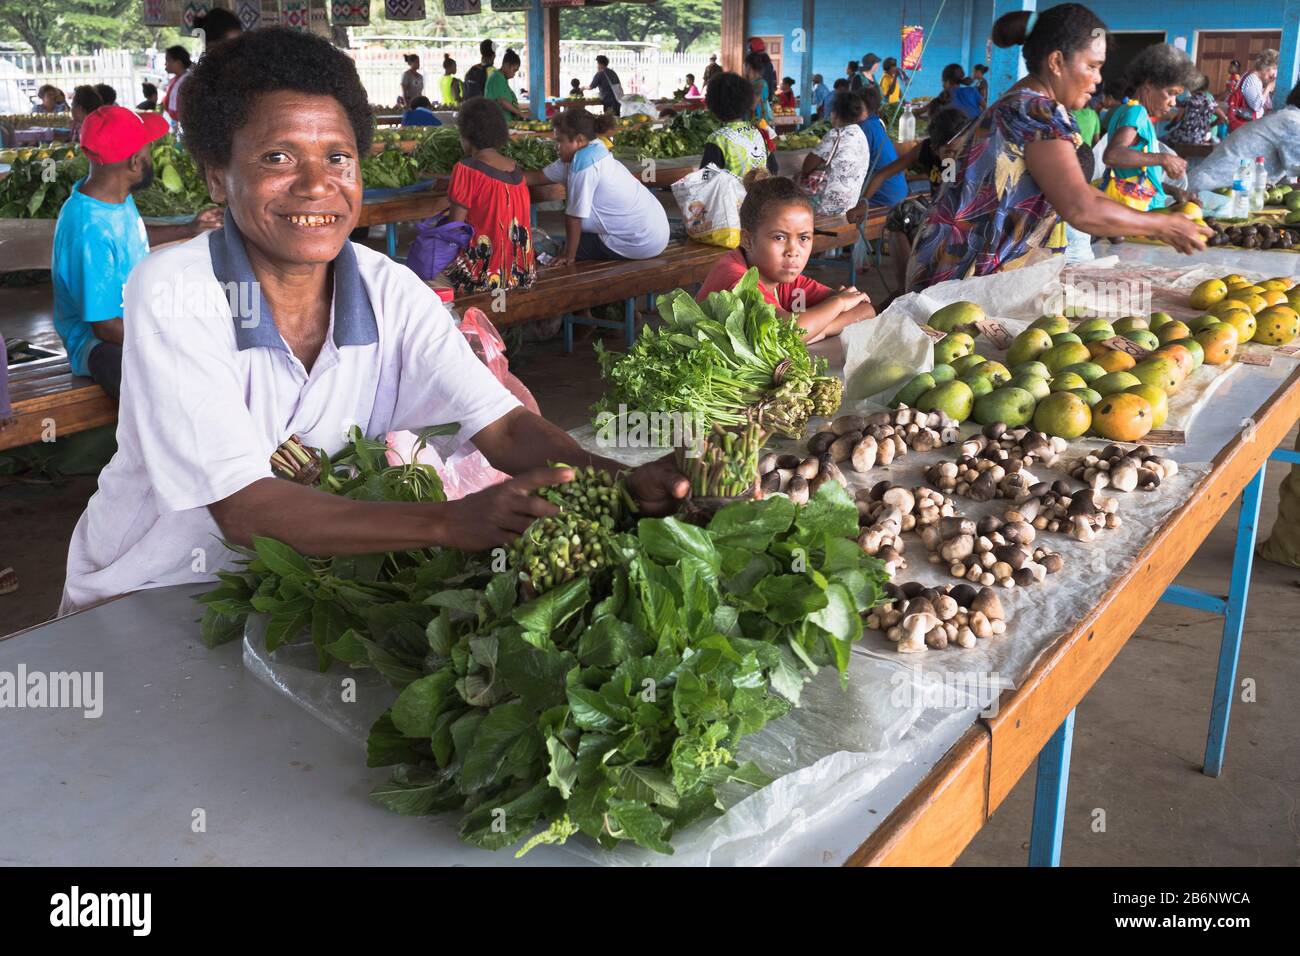 dh PNG Market vendor vegetables ALOTAU PAPUA NEW GUINEA Smiling native woman at fruit vegetable stall people locals person food rural asia Stock Photo